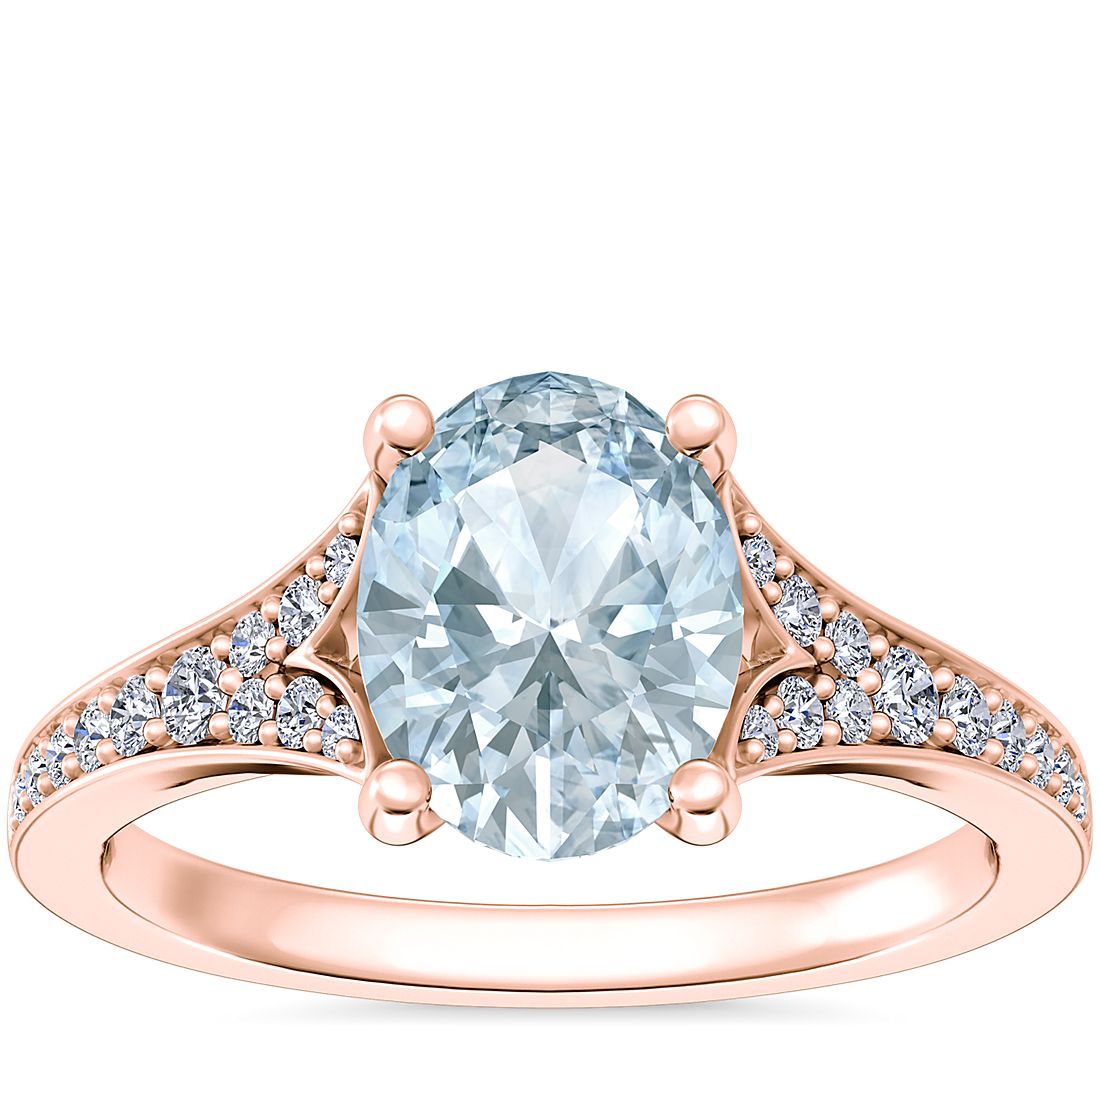 Petite Split Shank Pavé Cathedral Engagement Ring with Oval Aquamarine in 14k Rose Gold (8x6mm)